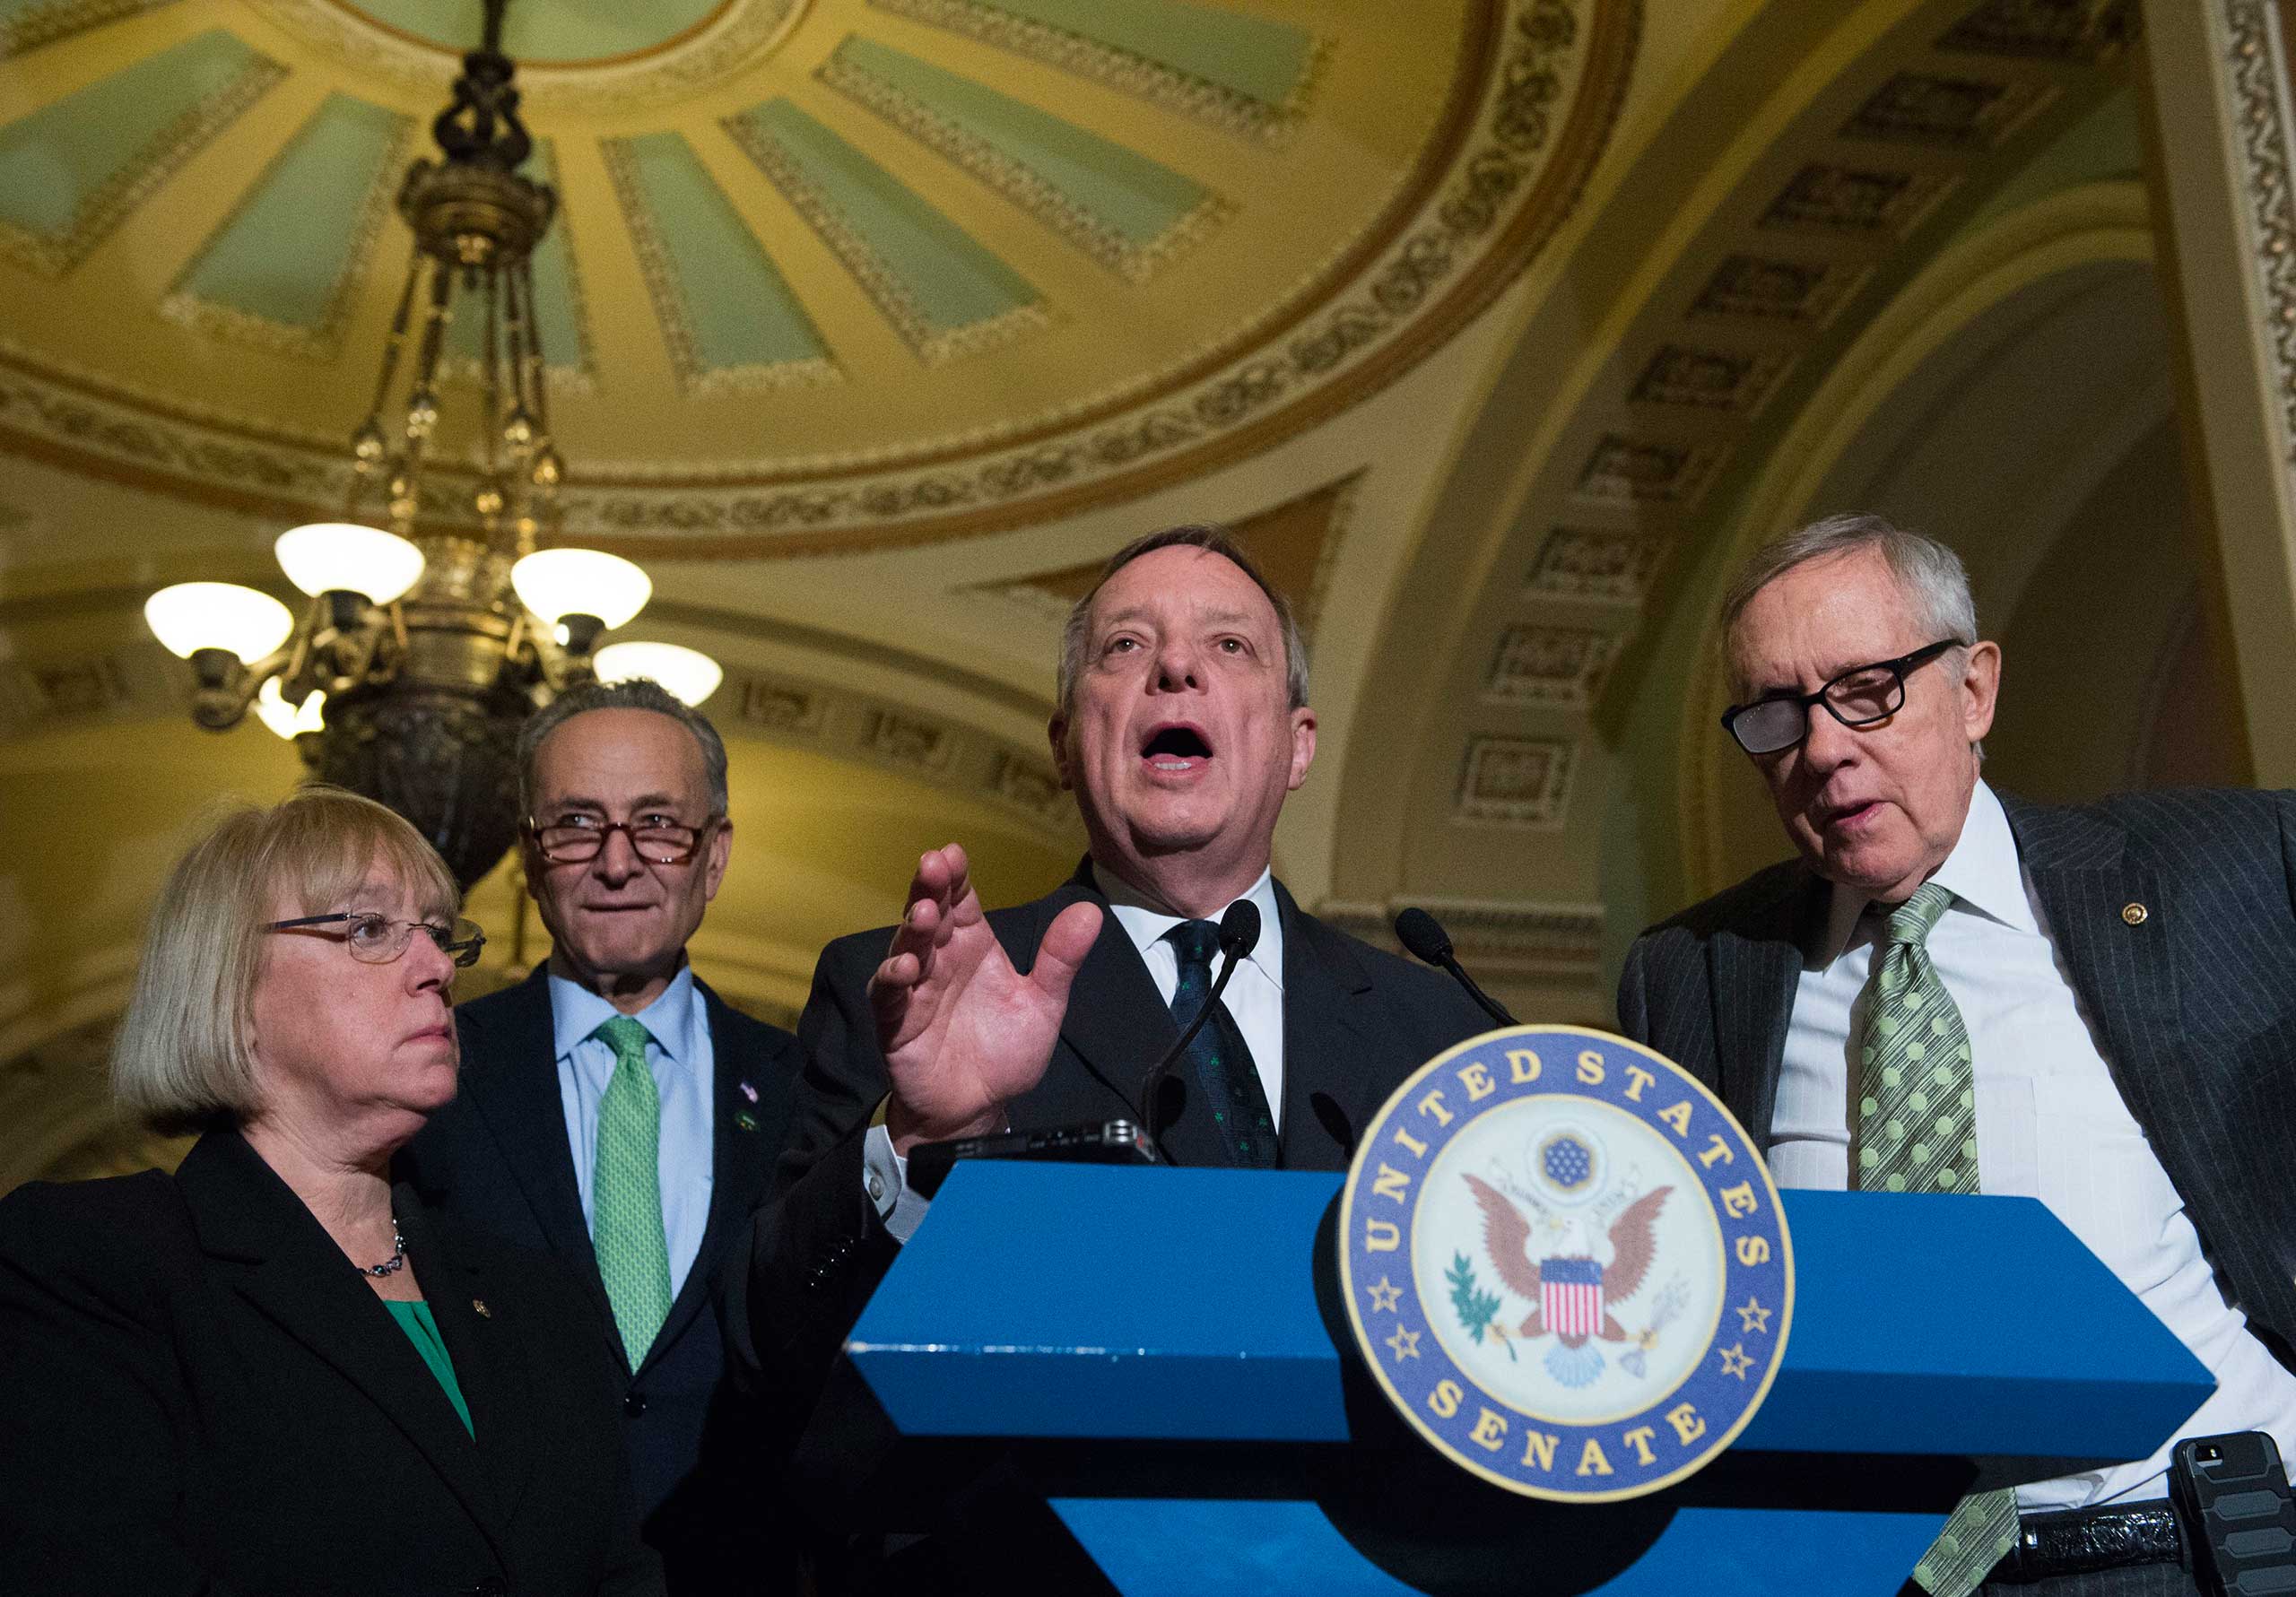 Senate Minority Whip Richard Durbin, D-Ill., speaks to reporters on Capitol Hill in Washington on March 17, 2015. From left are, Sen. Patty Murray, D-Wash., Sen. Charles Schumer, D-N.Y. Durbin, and Senate Minority Leader Harry Reid of Nev. (Molly Riley&mdash;AP)